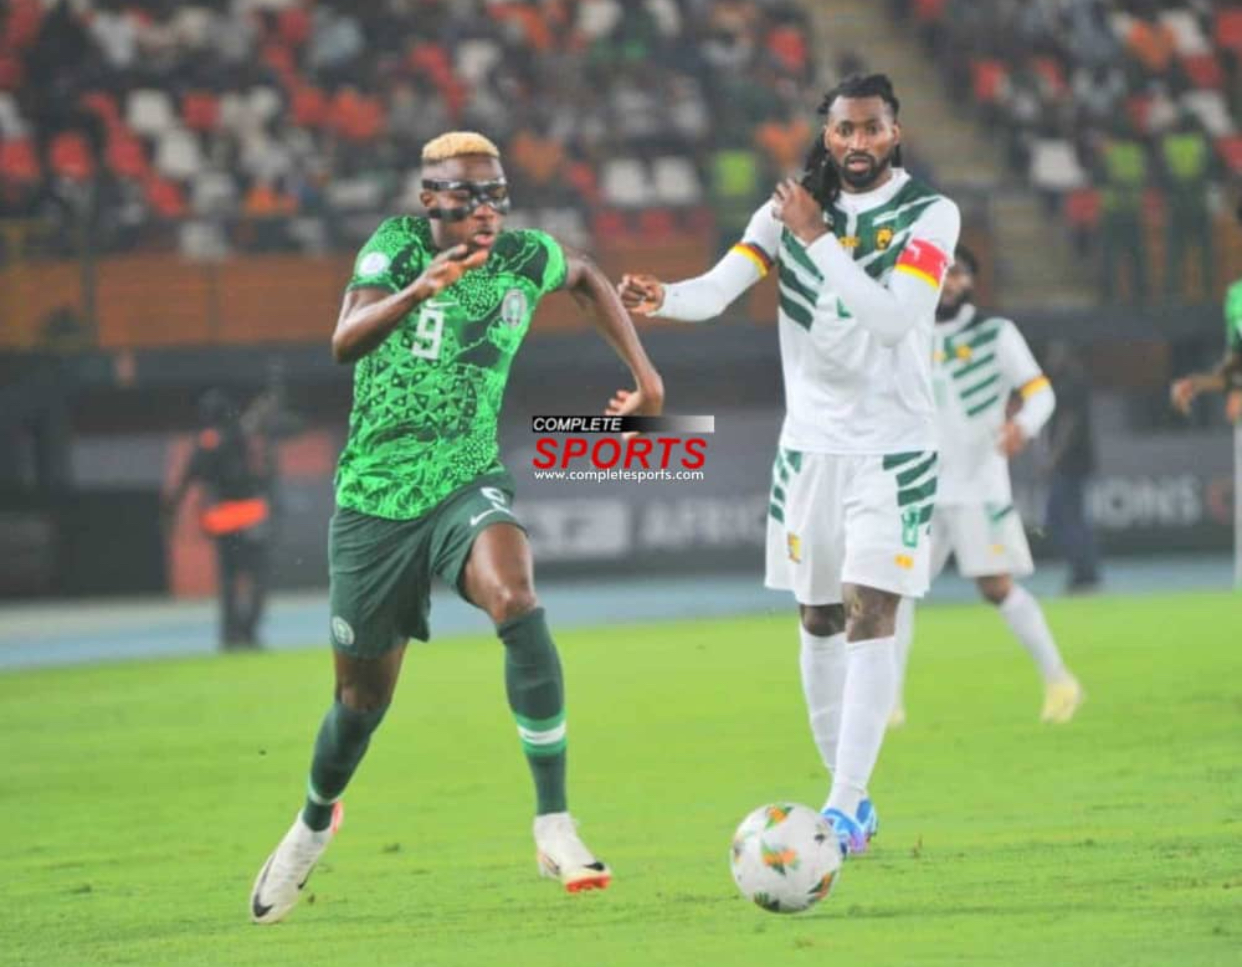 AFCON 2023: Osimhen Warns Super Eagles Not At Their Best Yet